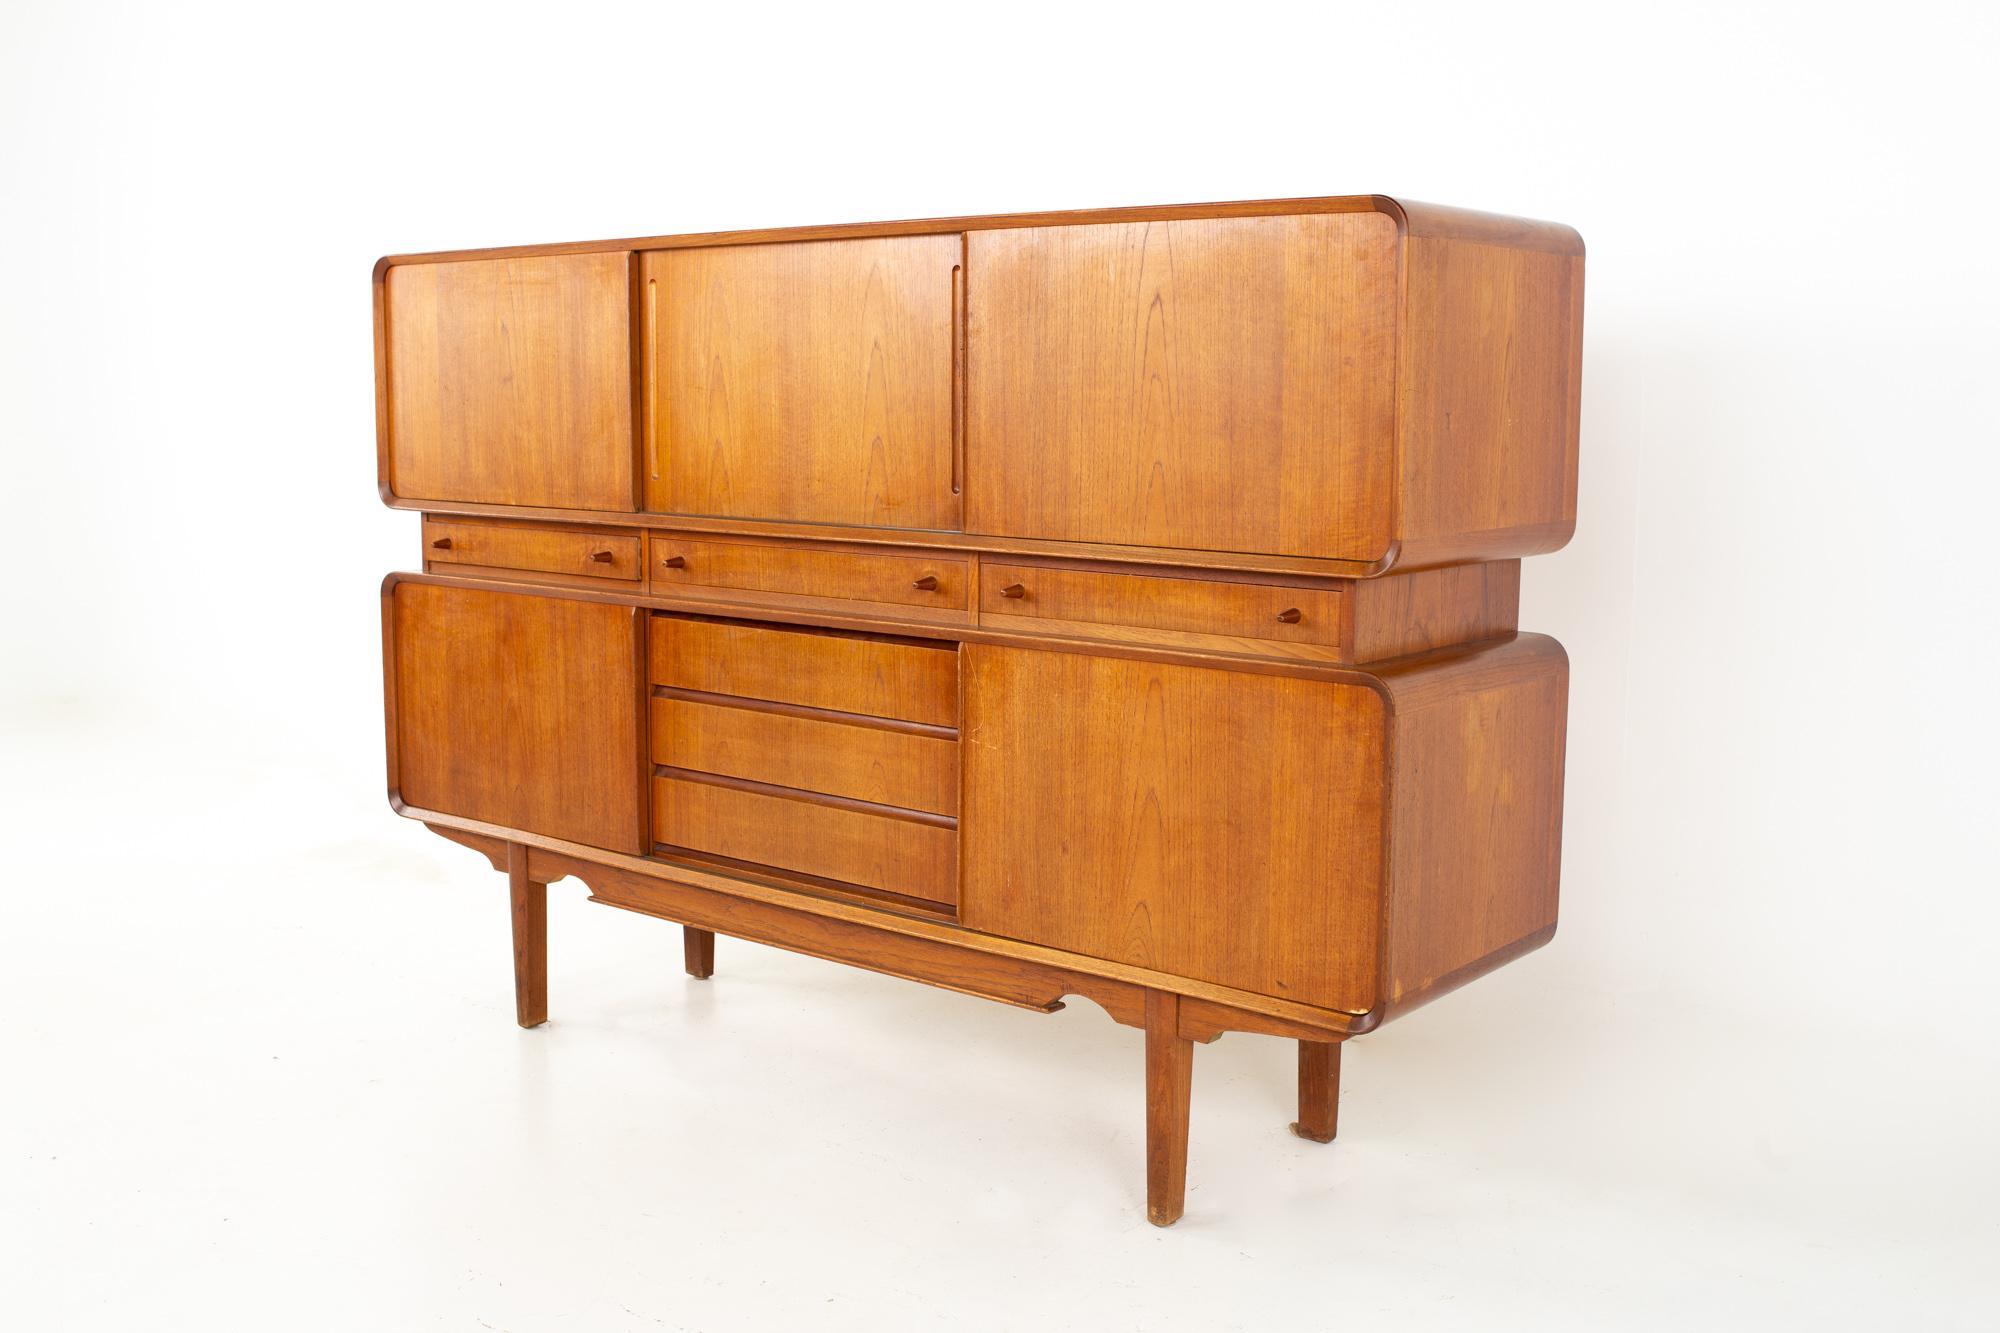 Midcentury Danish teak tall sideboard buffet credenza.
Credenza measures: 70.75 wide x 17.75 deep x 47 inches high

All pieces of furniture can be had in what we call restored vintage condition. That means the piece is restored upon purchase so